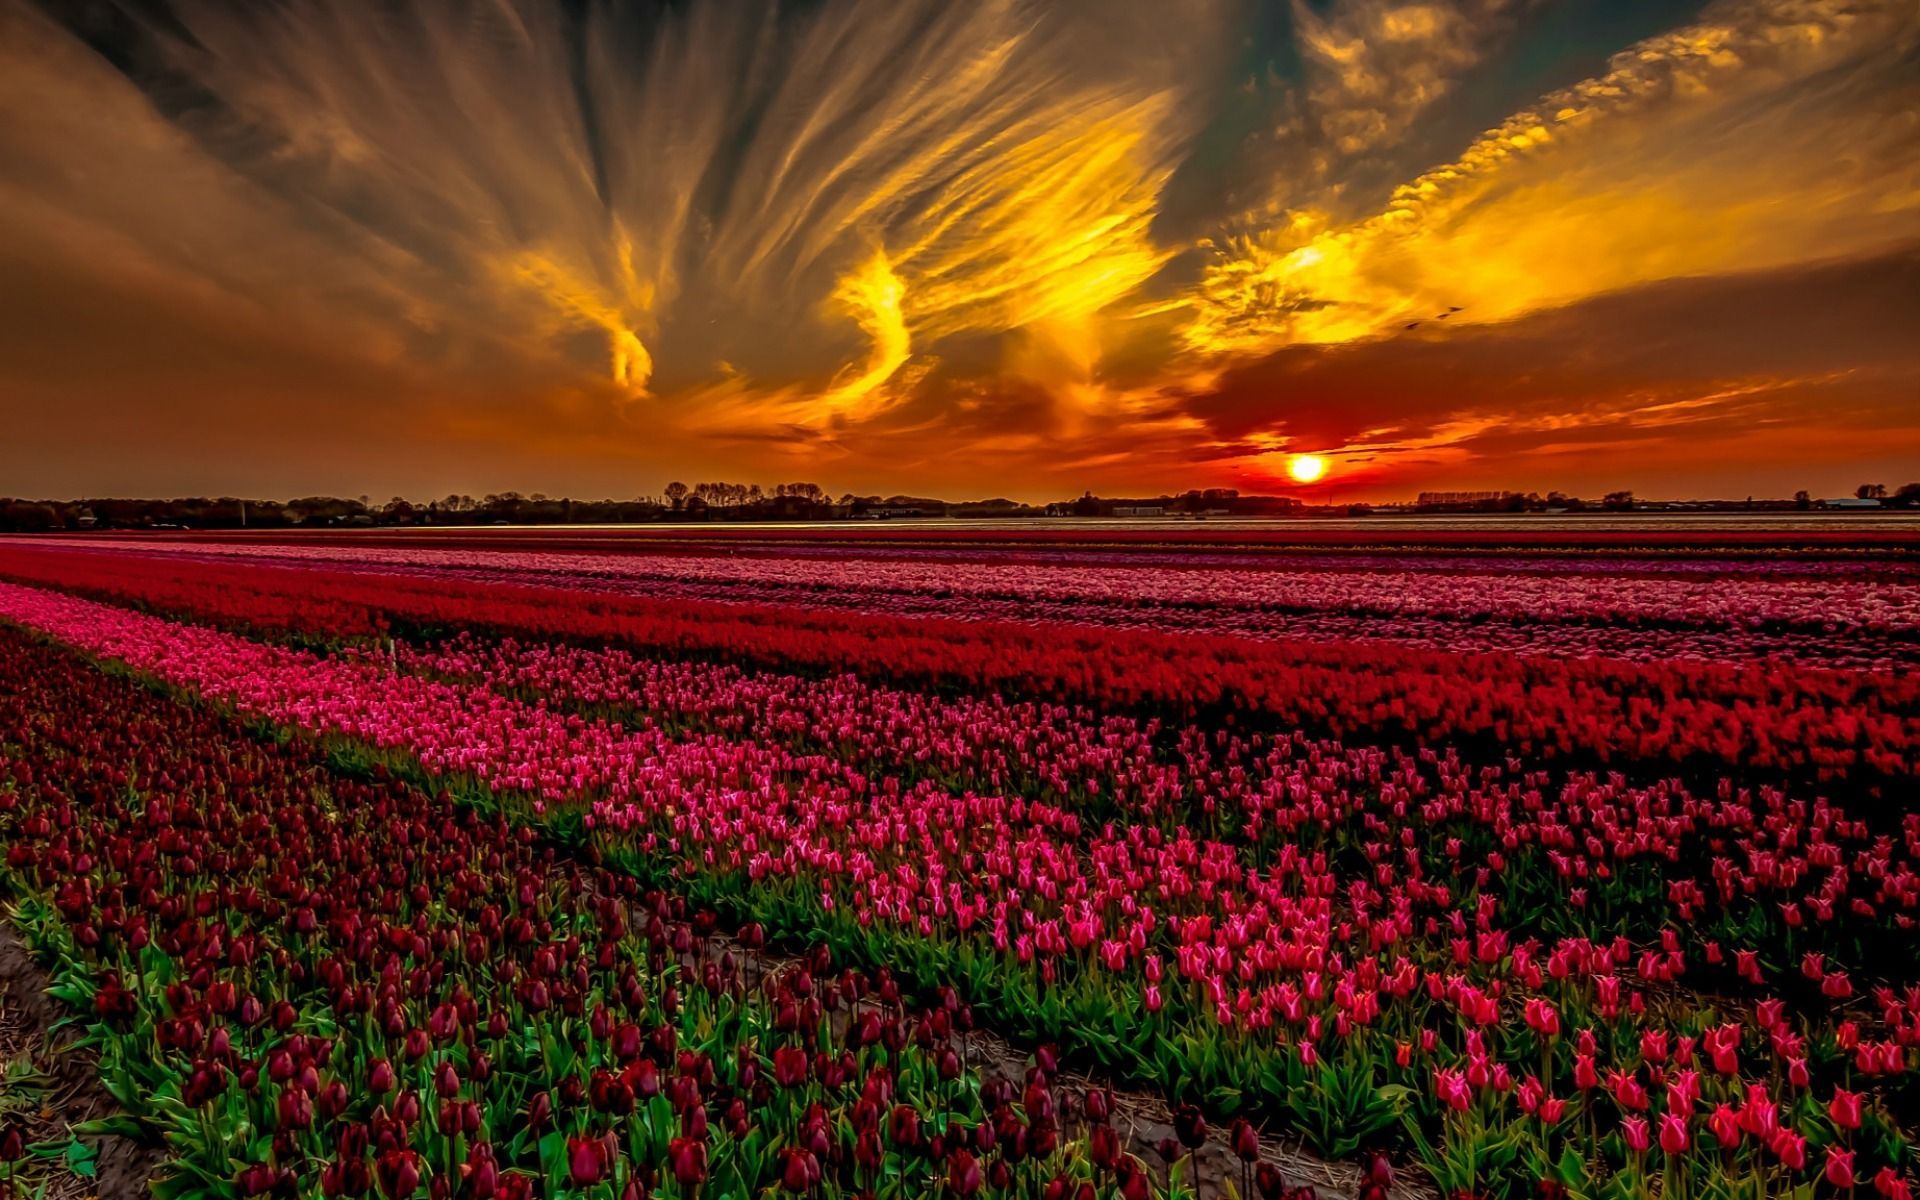 Sunset over Tulip Field Nexus Wallpaper. Forest scenery, Landscape photography, Nature